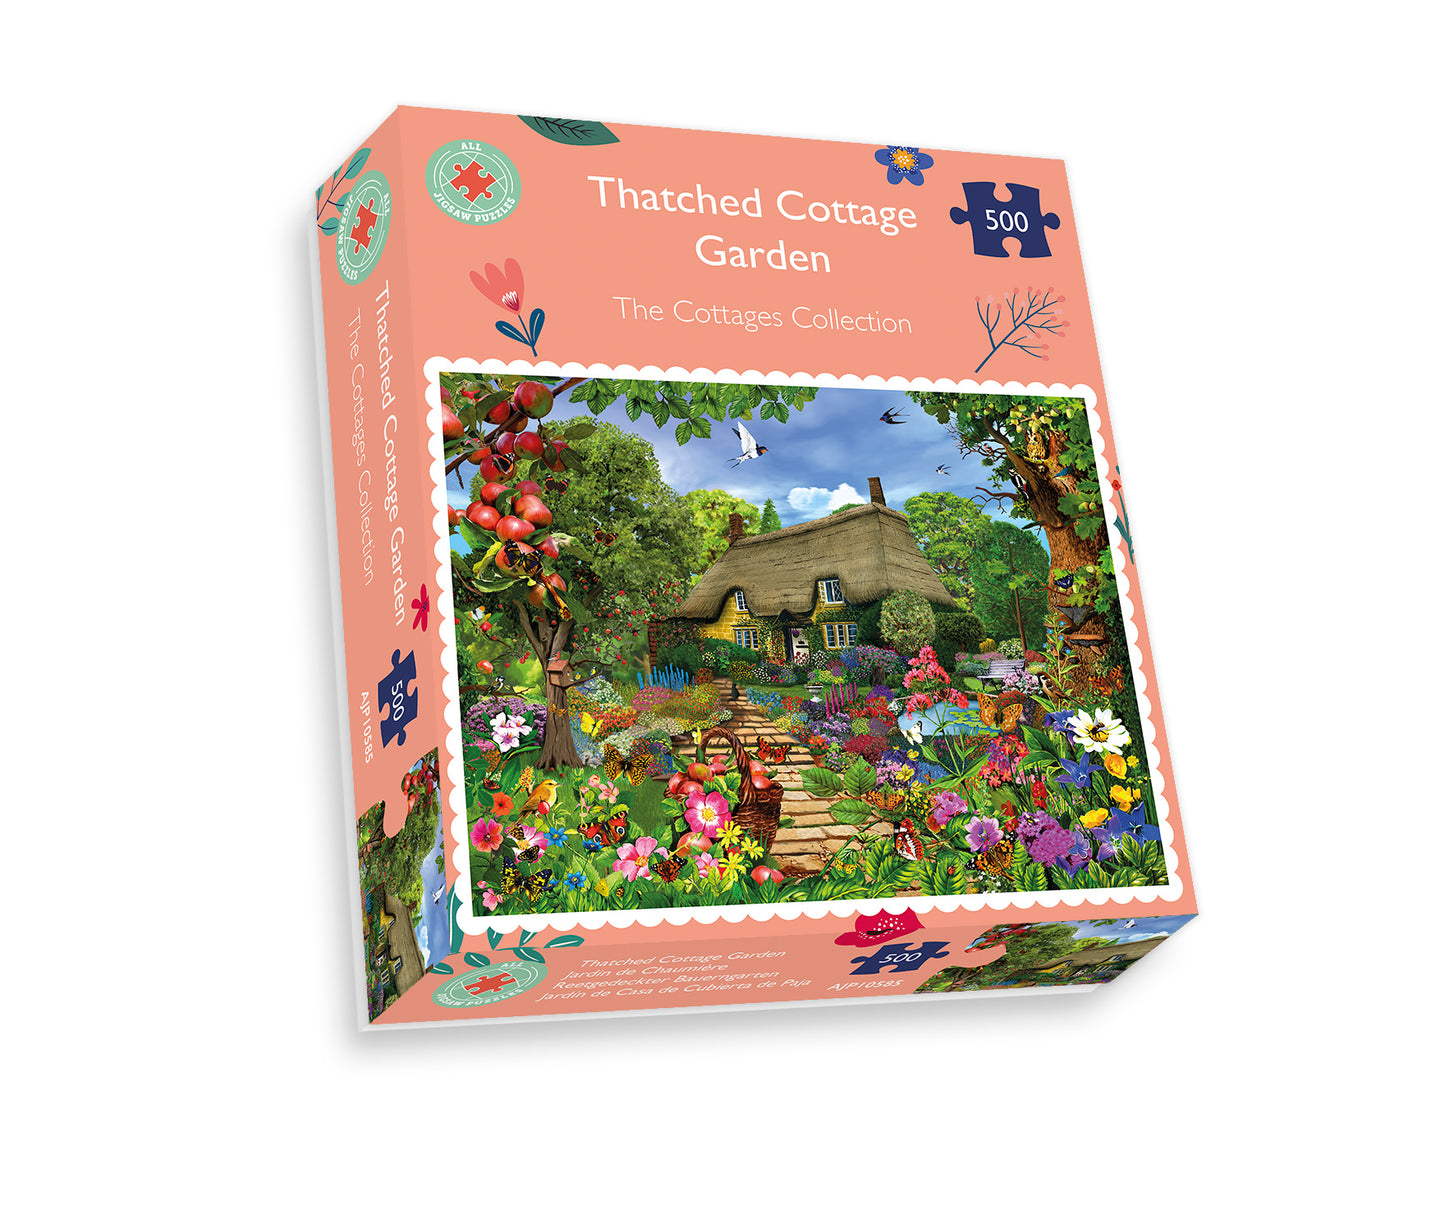 Thatched Cottage Garden 1000 or 500 Piece Jigsaw Puzzles